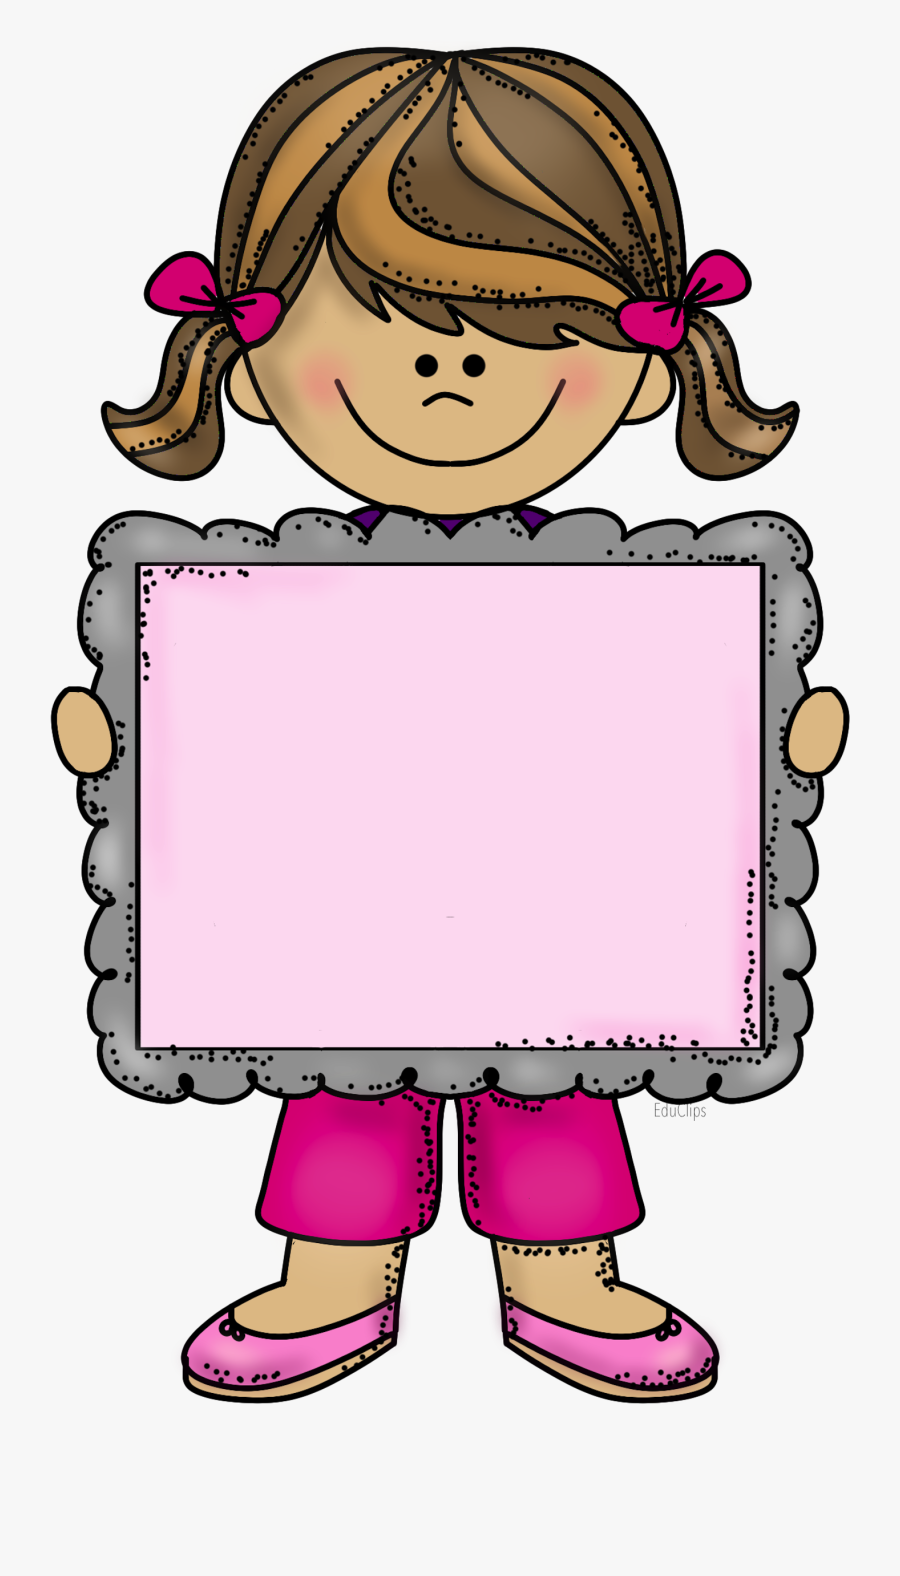 Girl With Banner Clipart - Girl With Frame Clipart, Transparent Clipart